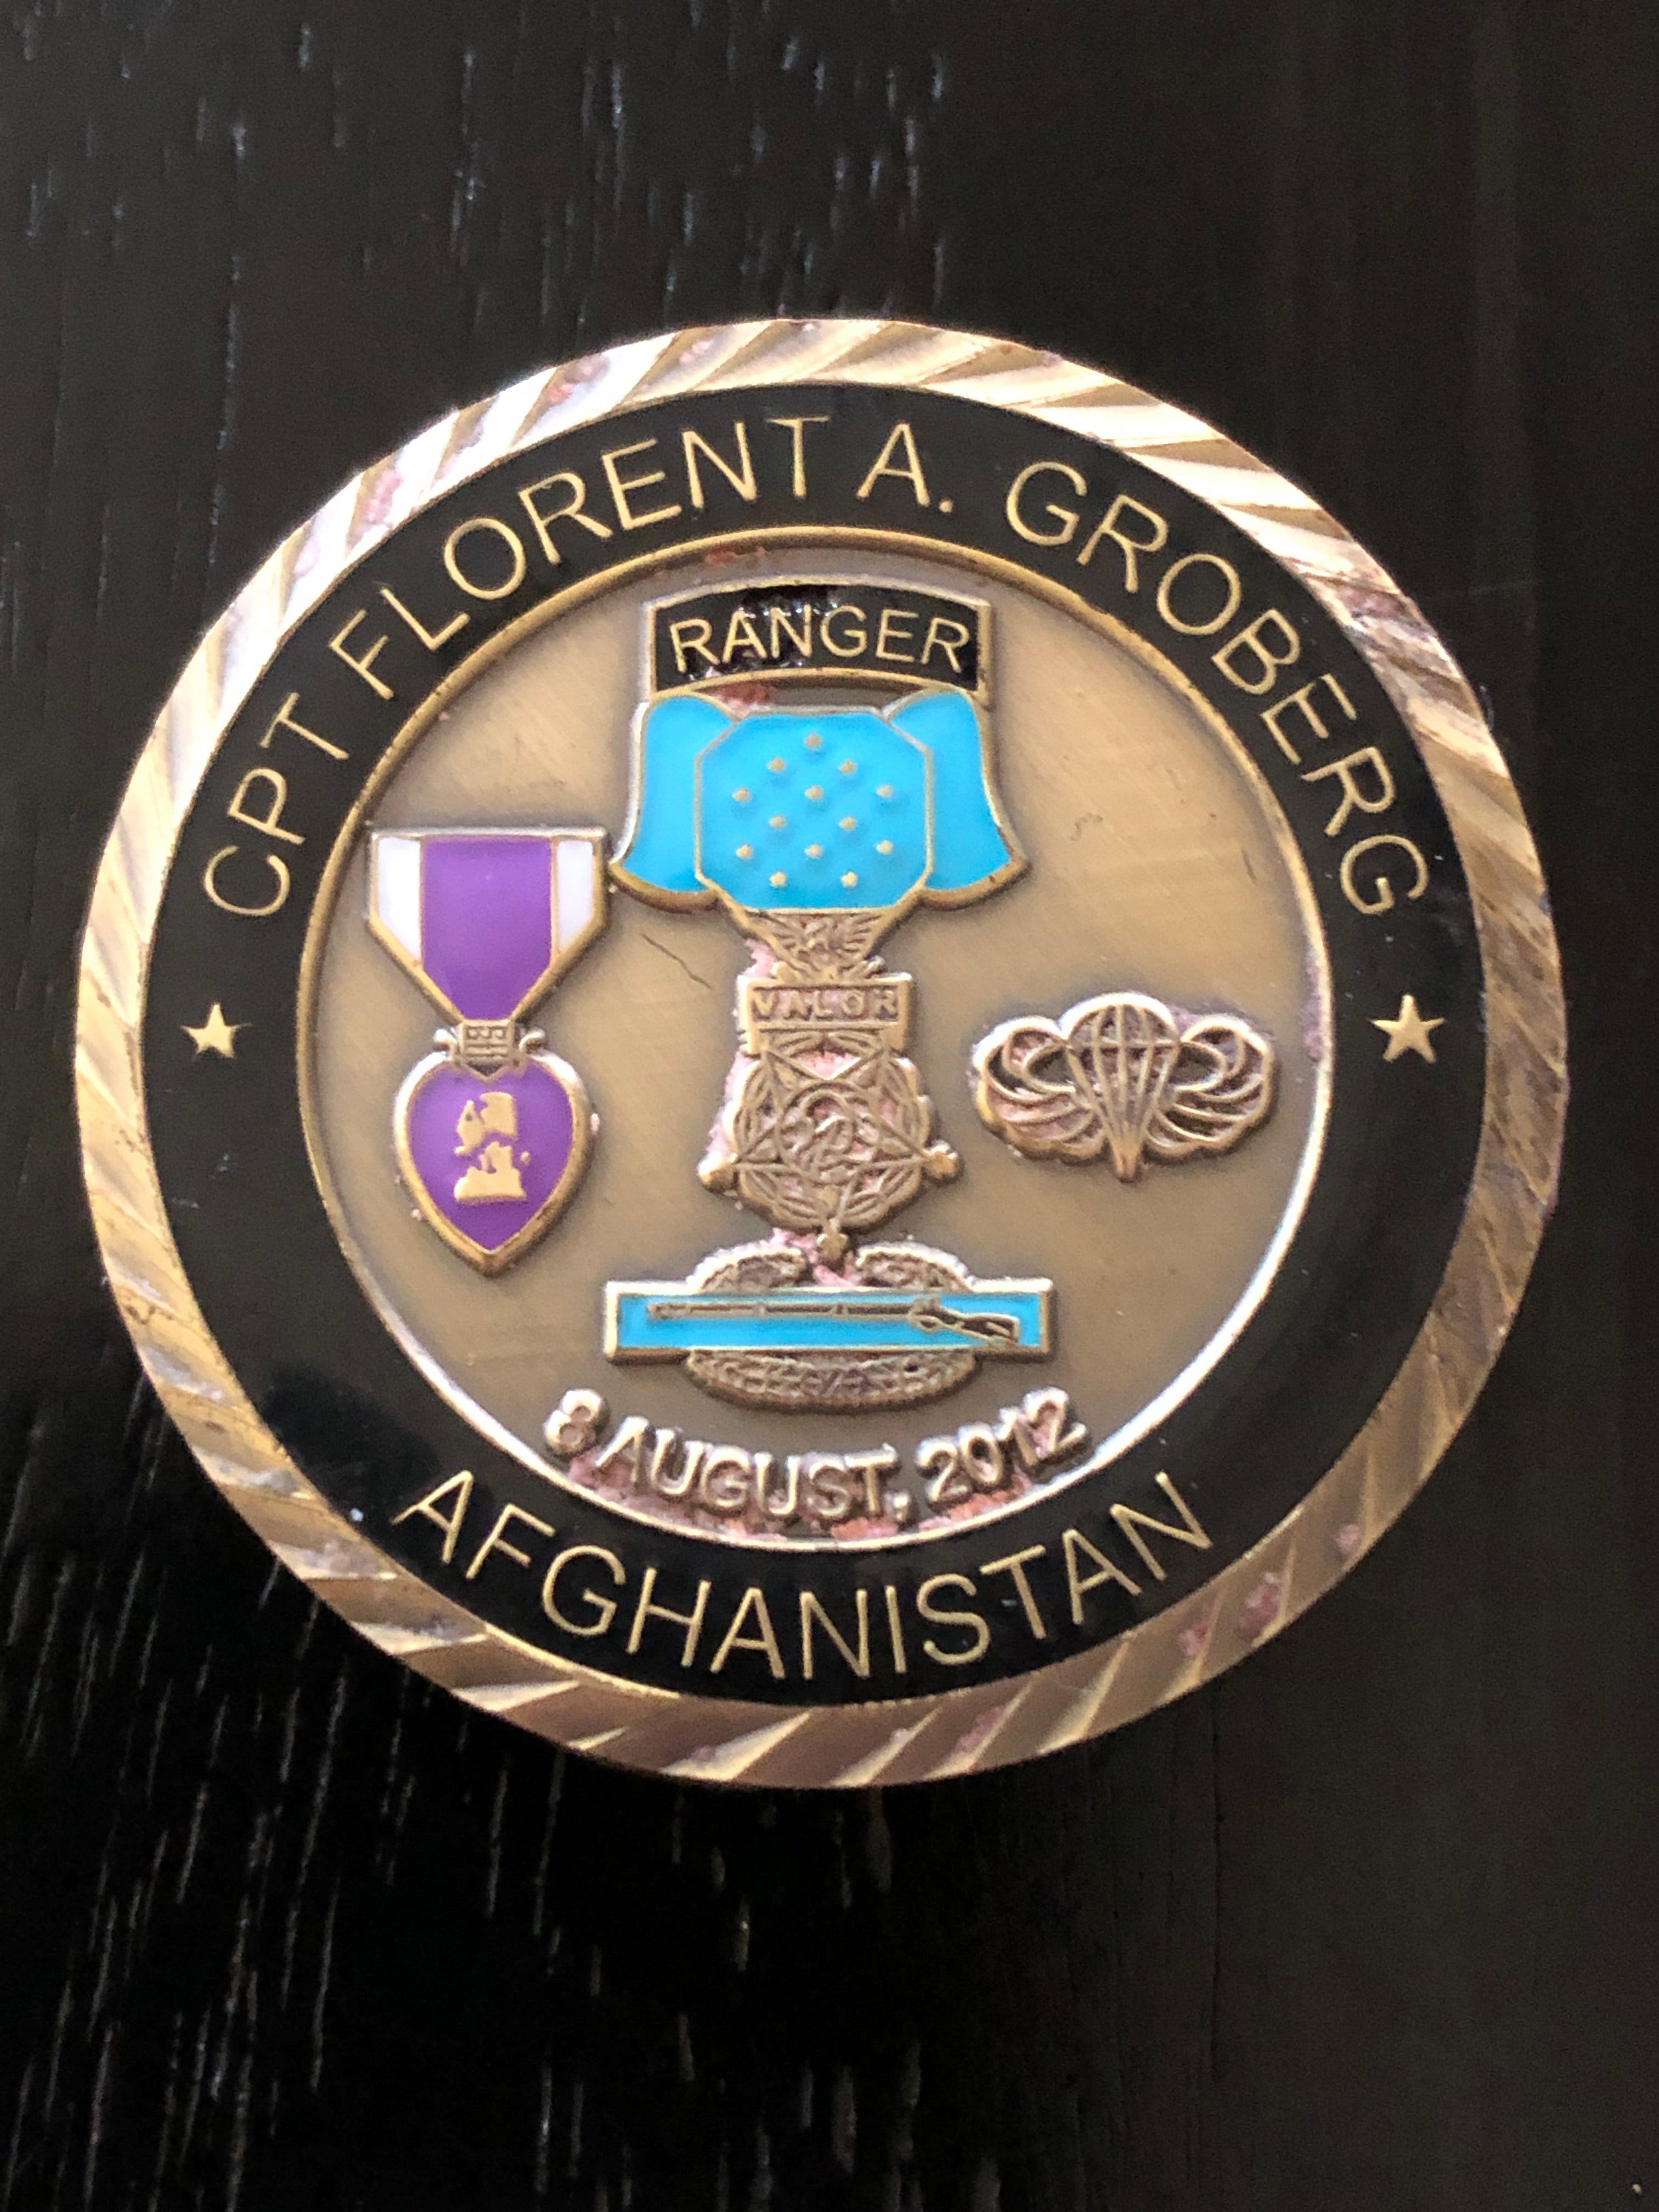 Medal of Honor (MoH) Recipient CPT Florent Groberg